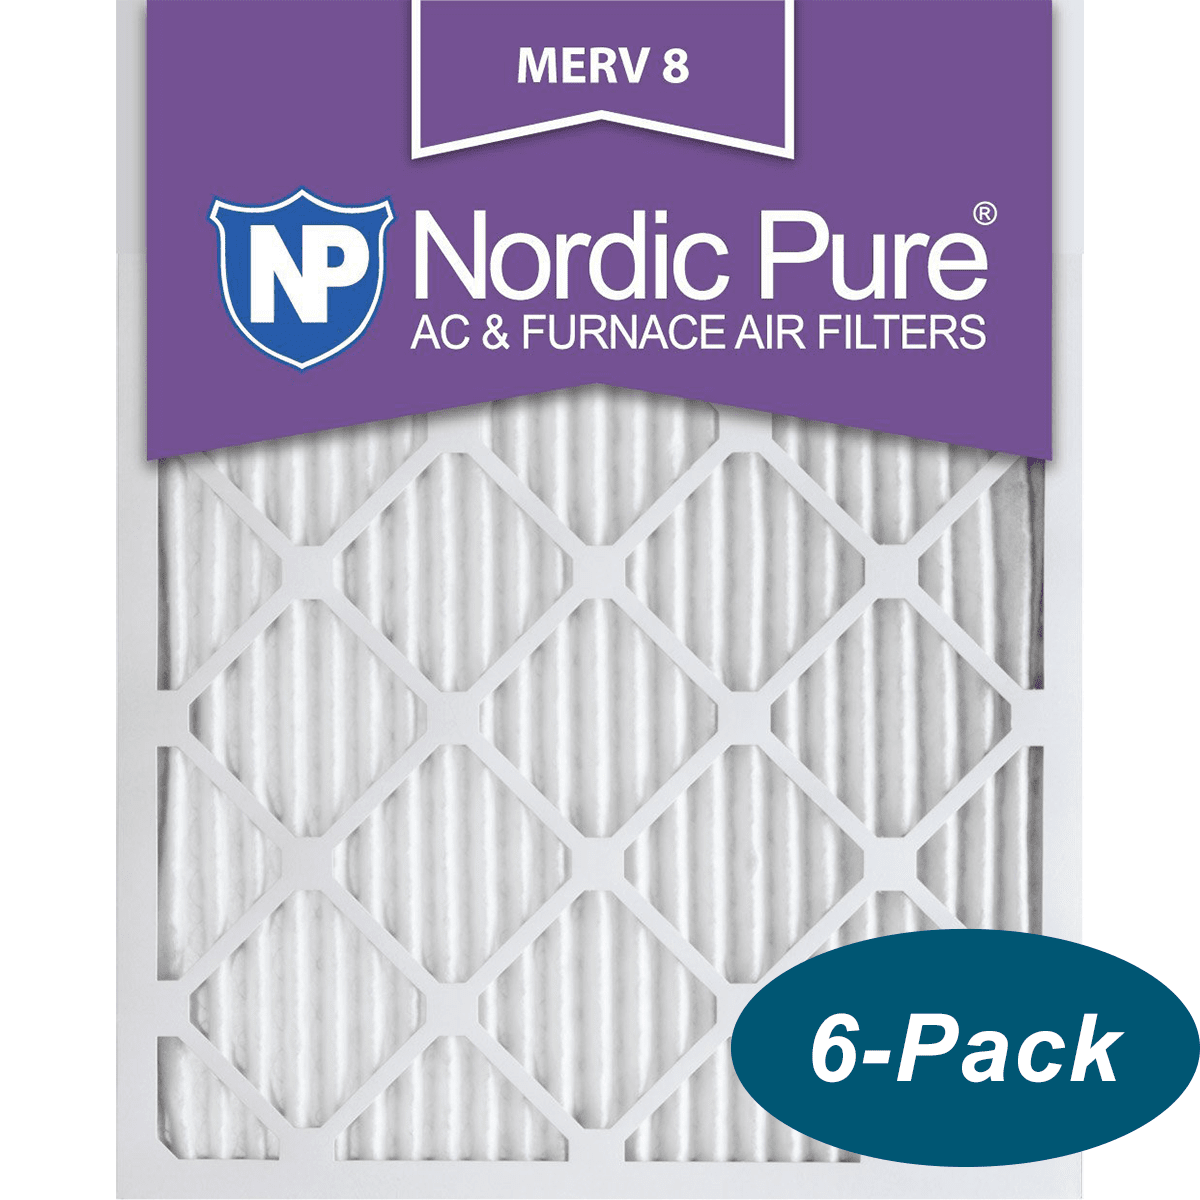 Nordic Pure MERV 8 Pleated Furnace Filter 20x25x1 6-Pack (20x25x1M8-6)